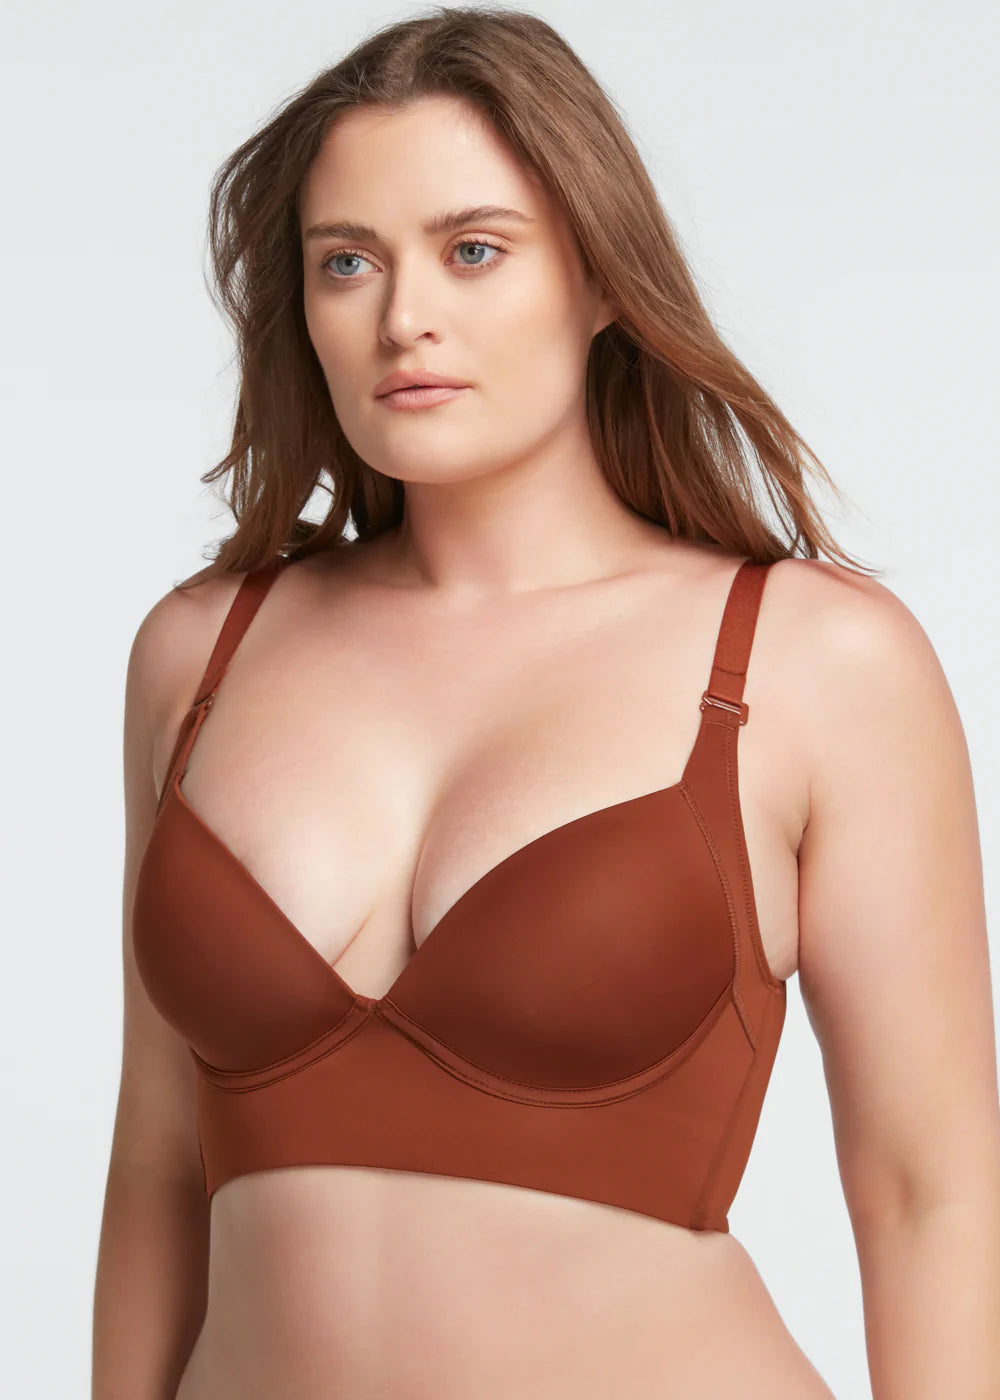 She's Waisted # Pushup Bra!!Honest review from a plus size girl